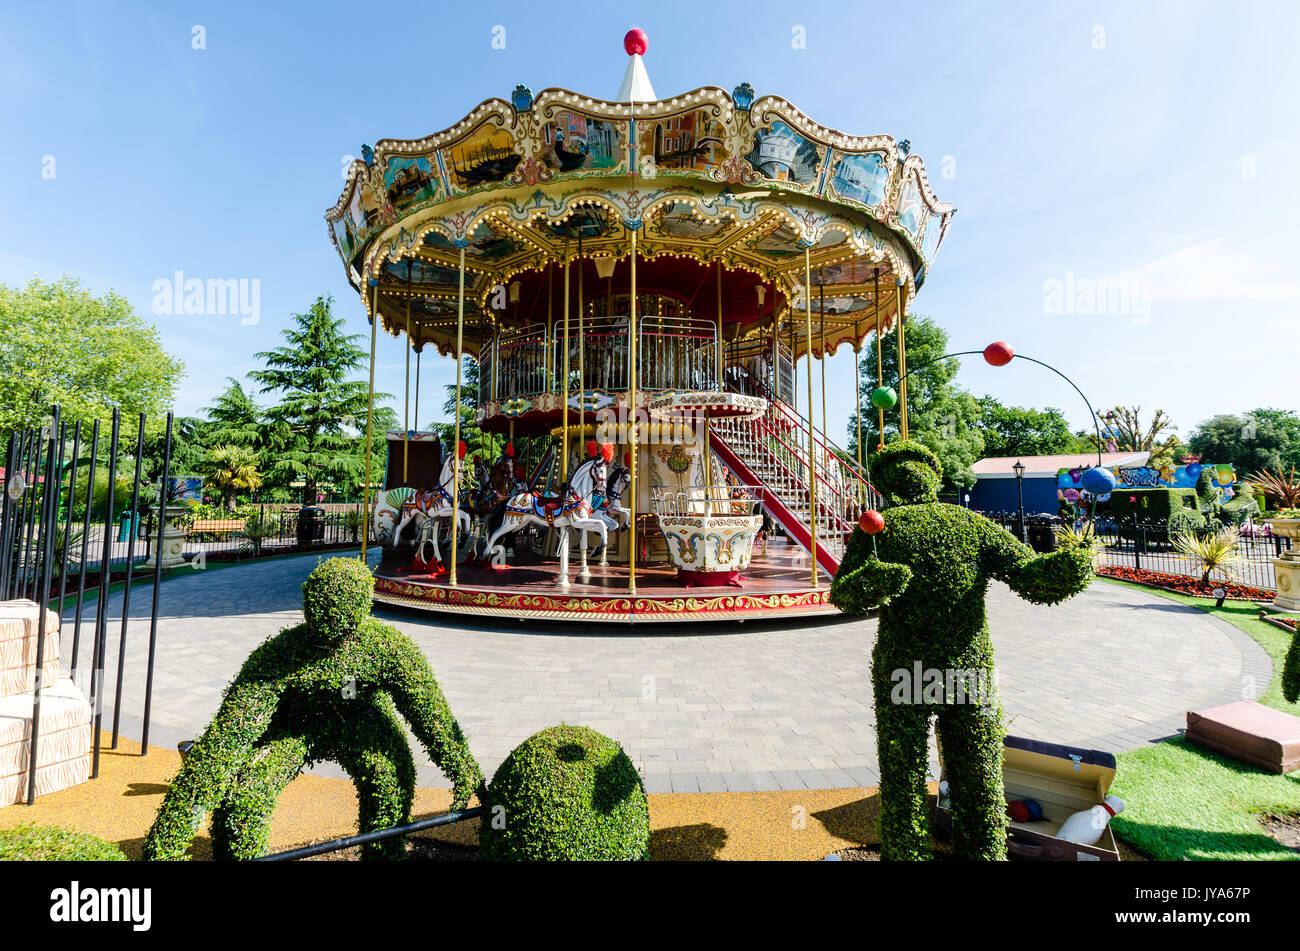 Brightly painted Victorian carousel with topiary figures in foreground Stock Photo